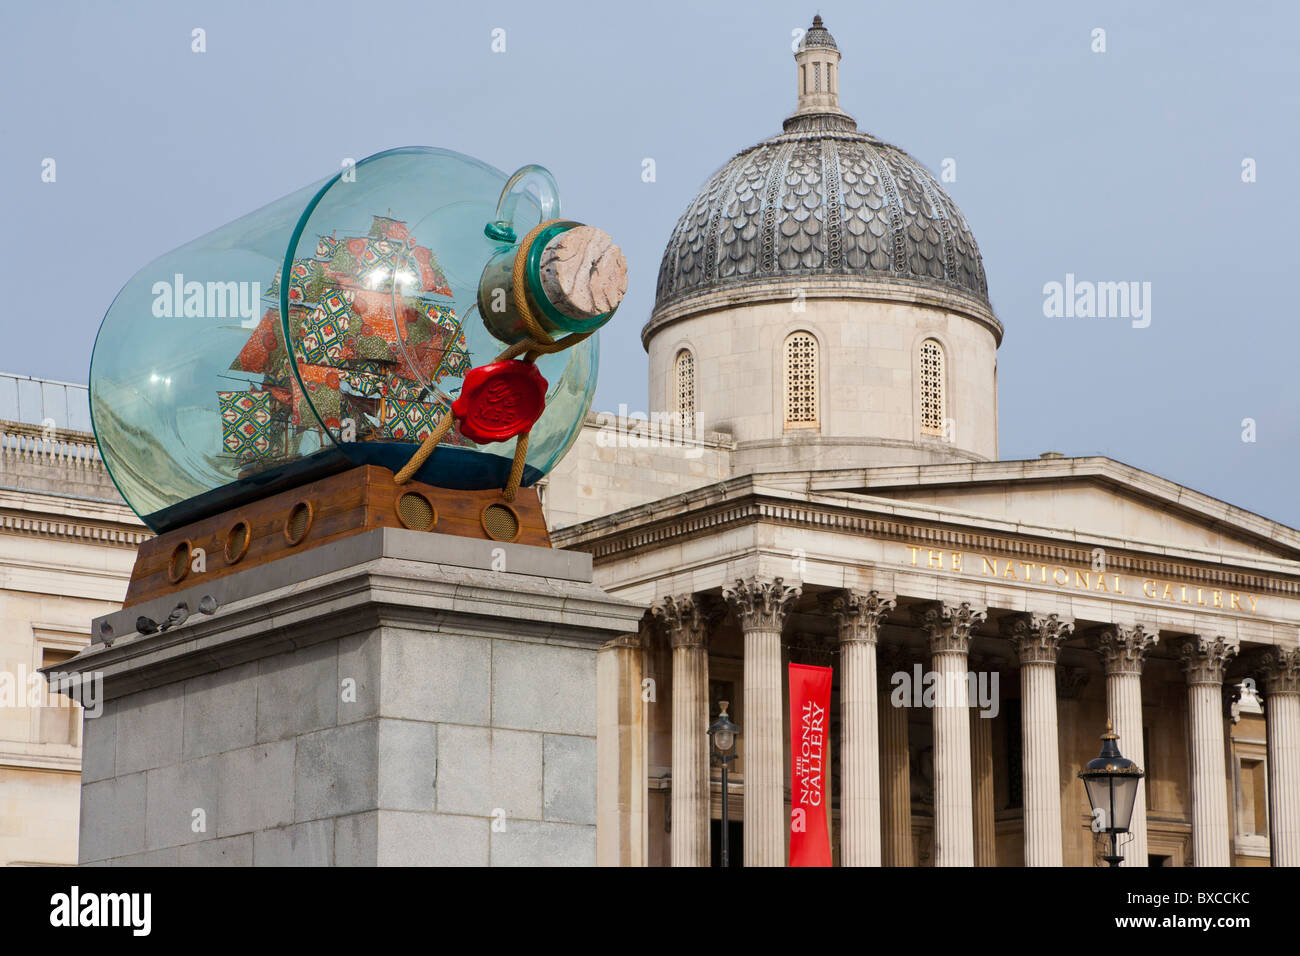 ART OF YINKA SHONIBARE, IN FRONT OF THE NATIONAL GALLERY, MUSEUM, TRAFALGAR SQUARE,  LONDON, ENGLAND, GREAT BRITAIN Stock Photo